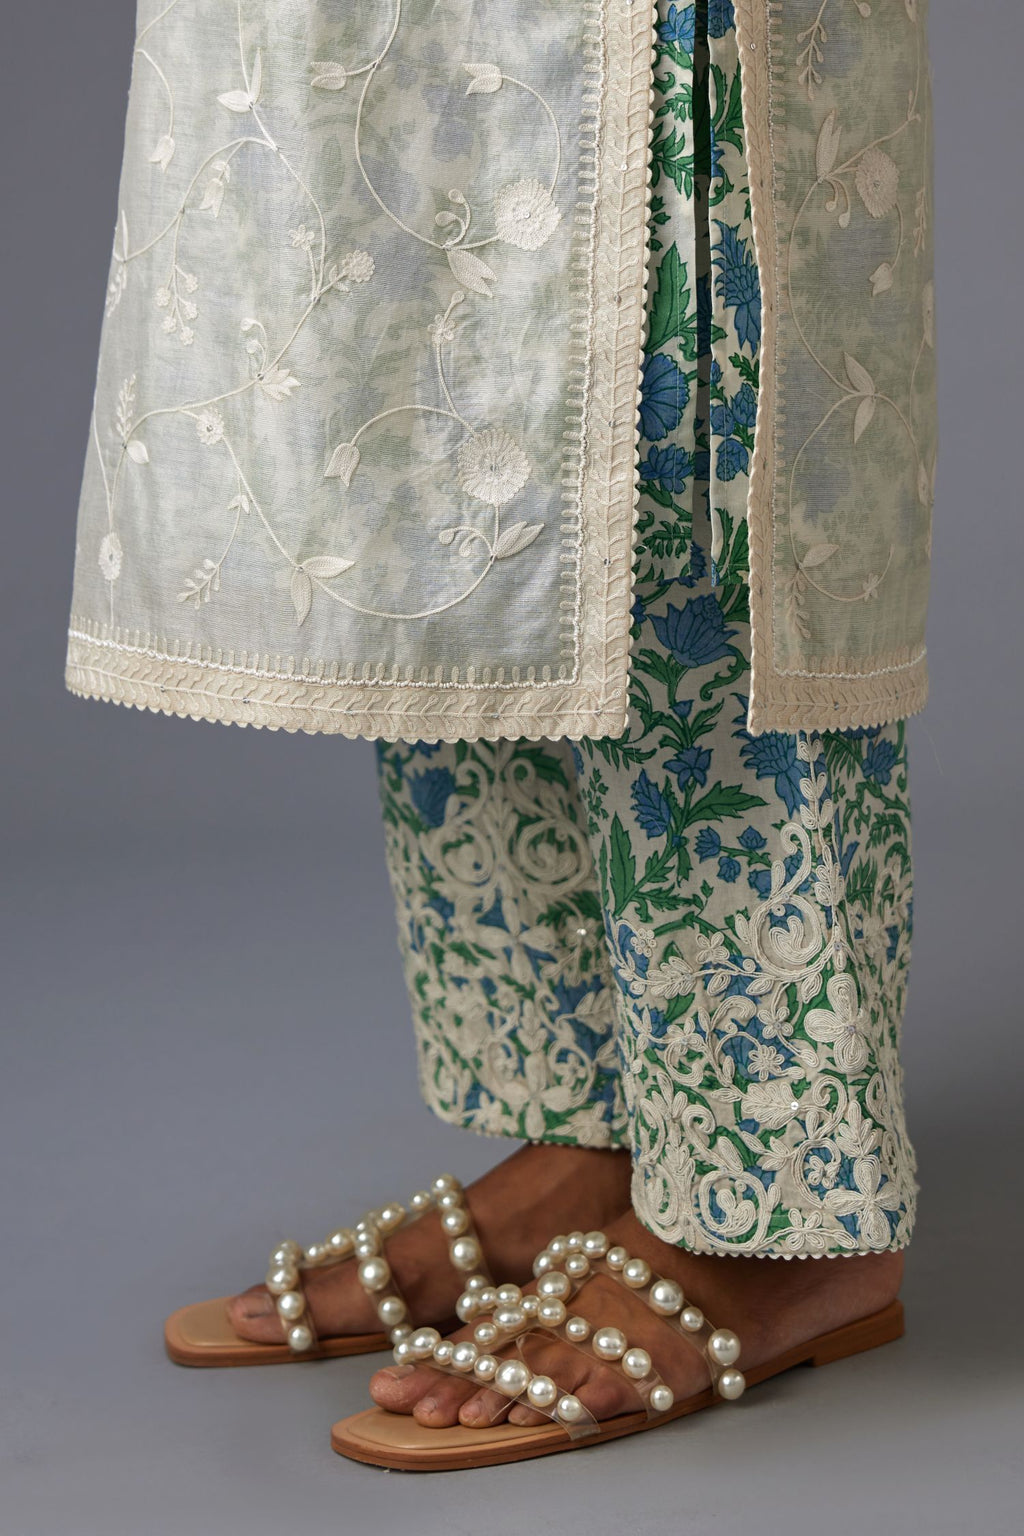 Off white silk chanderi straight kurta set with all-over tonal thread jaal embroidery and bead work at edges